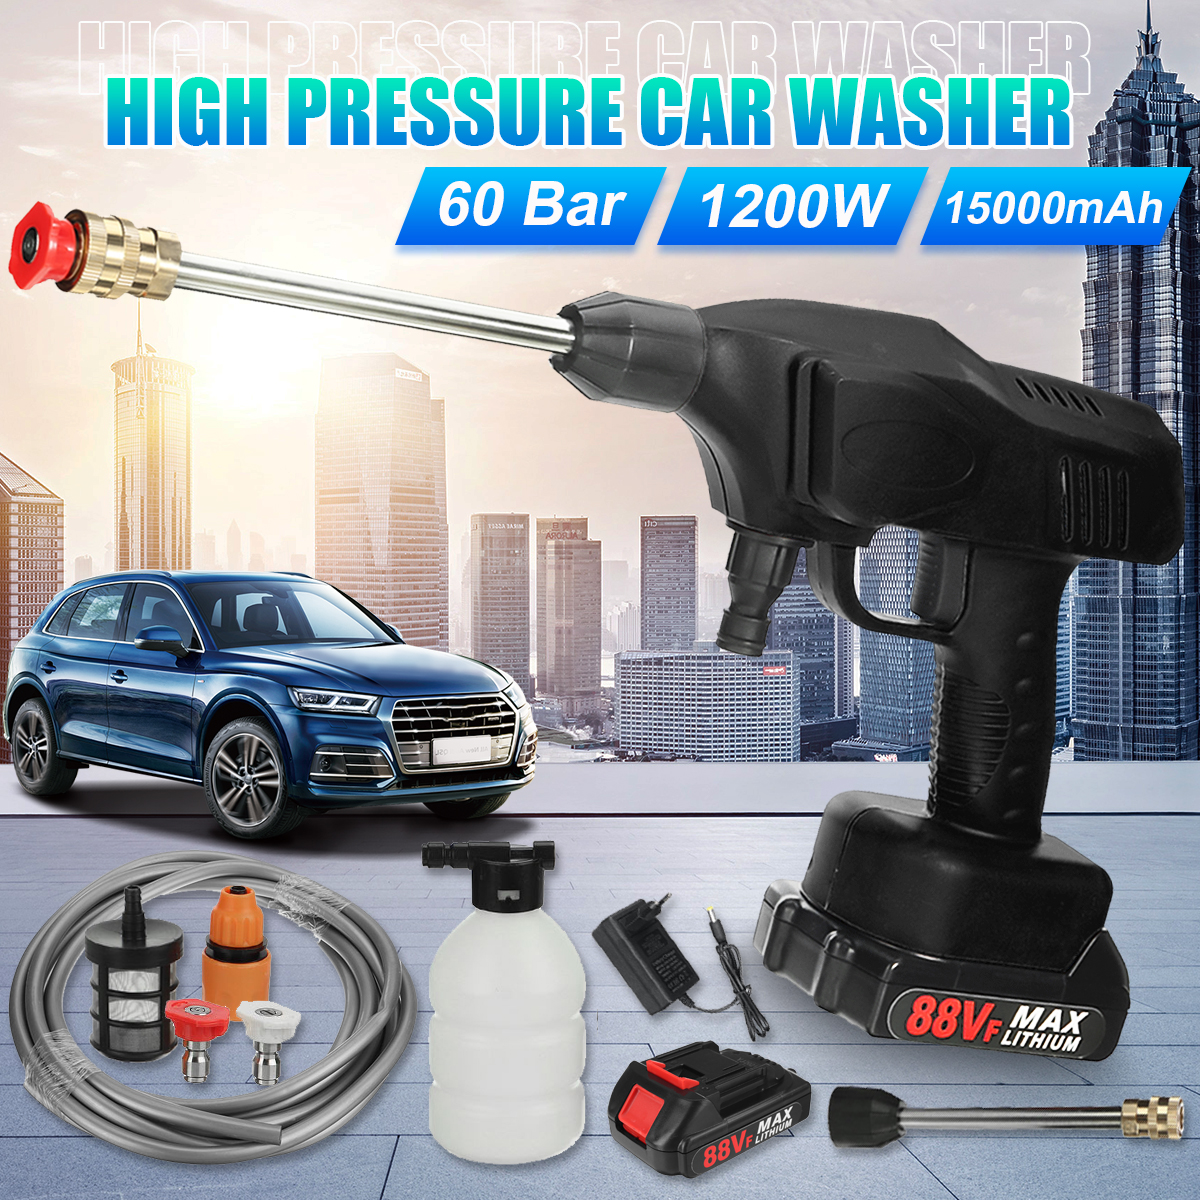 1200W-88VF-Portable-Cordless-Car-Washer-High-Pressure-Car-Household-Washer-Cleaner-Guns-Pumps-Tool-F-1891056-2